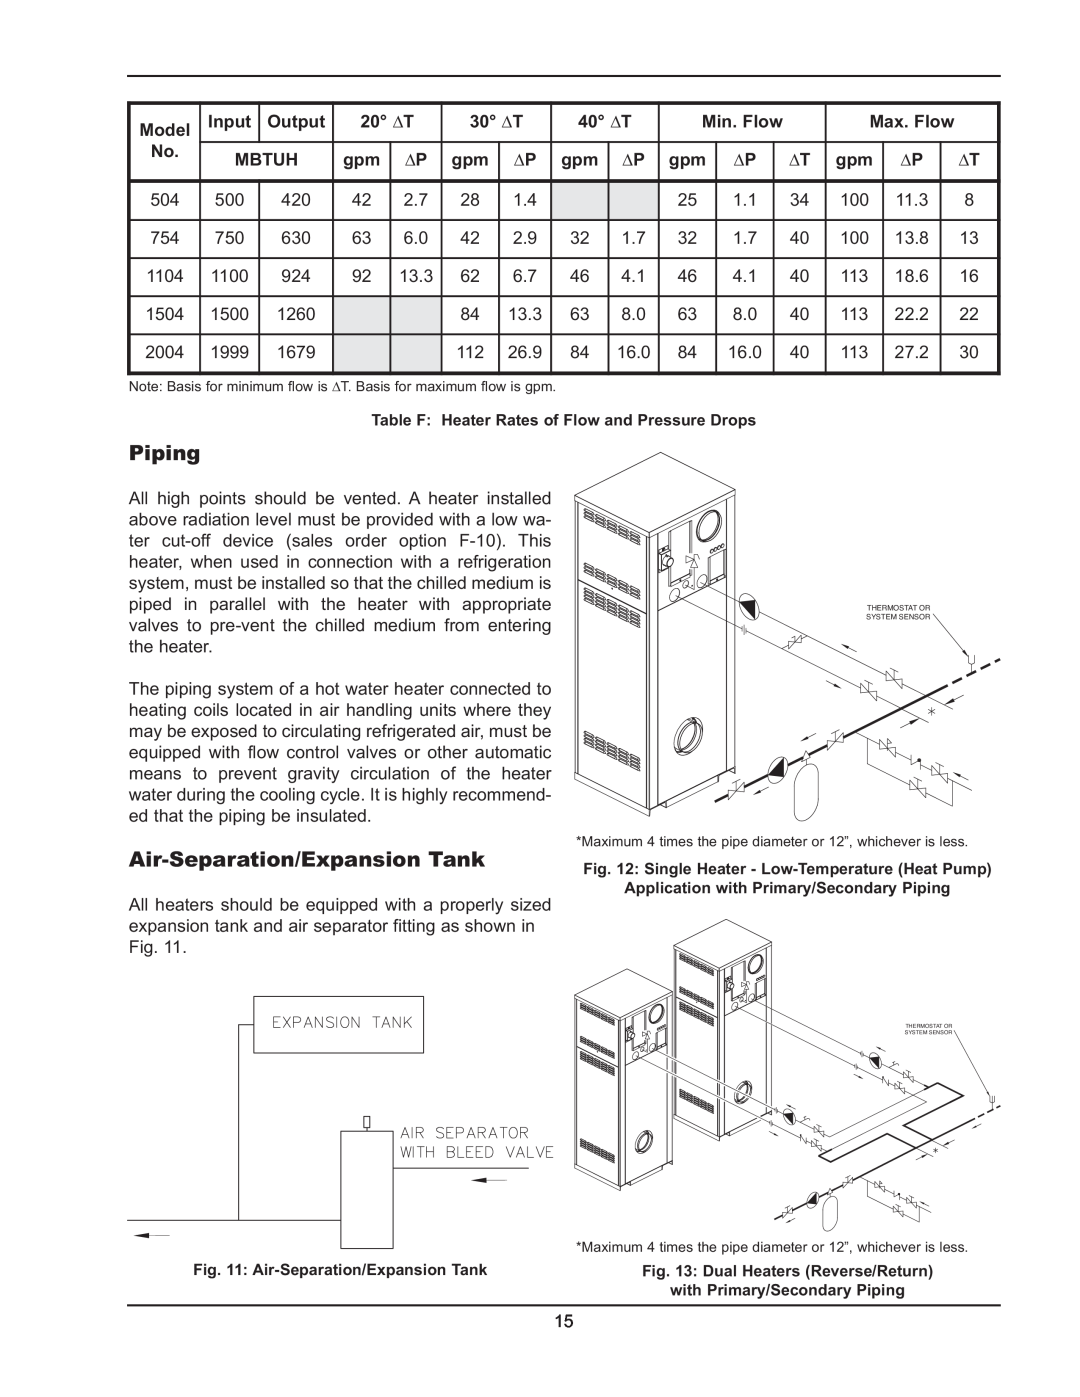 Raypak 5042004 operating instructions Model, Input, Output, 20 ∆T, 30 ∆T, 40 ∆T, Min. Flow, Mbtuh 